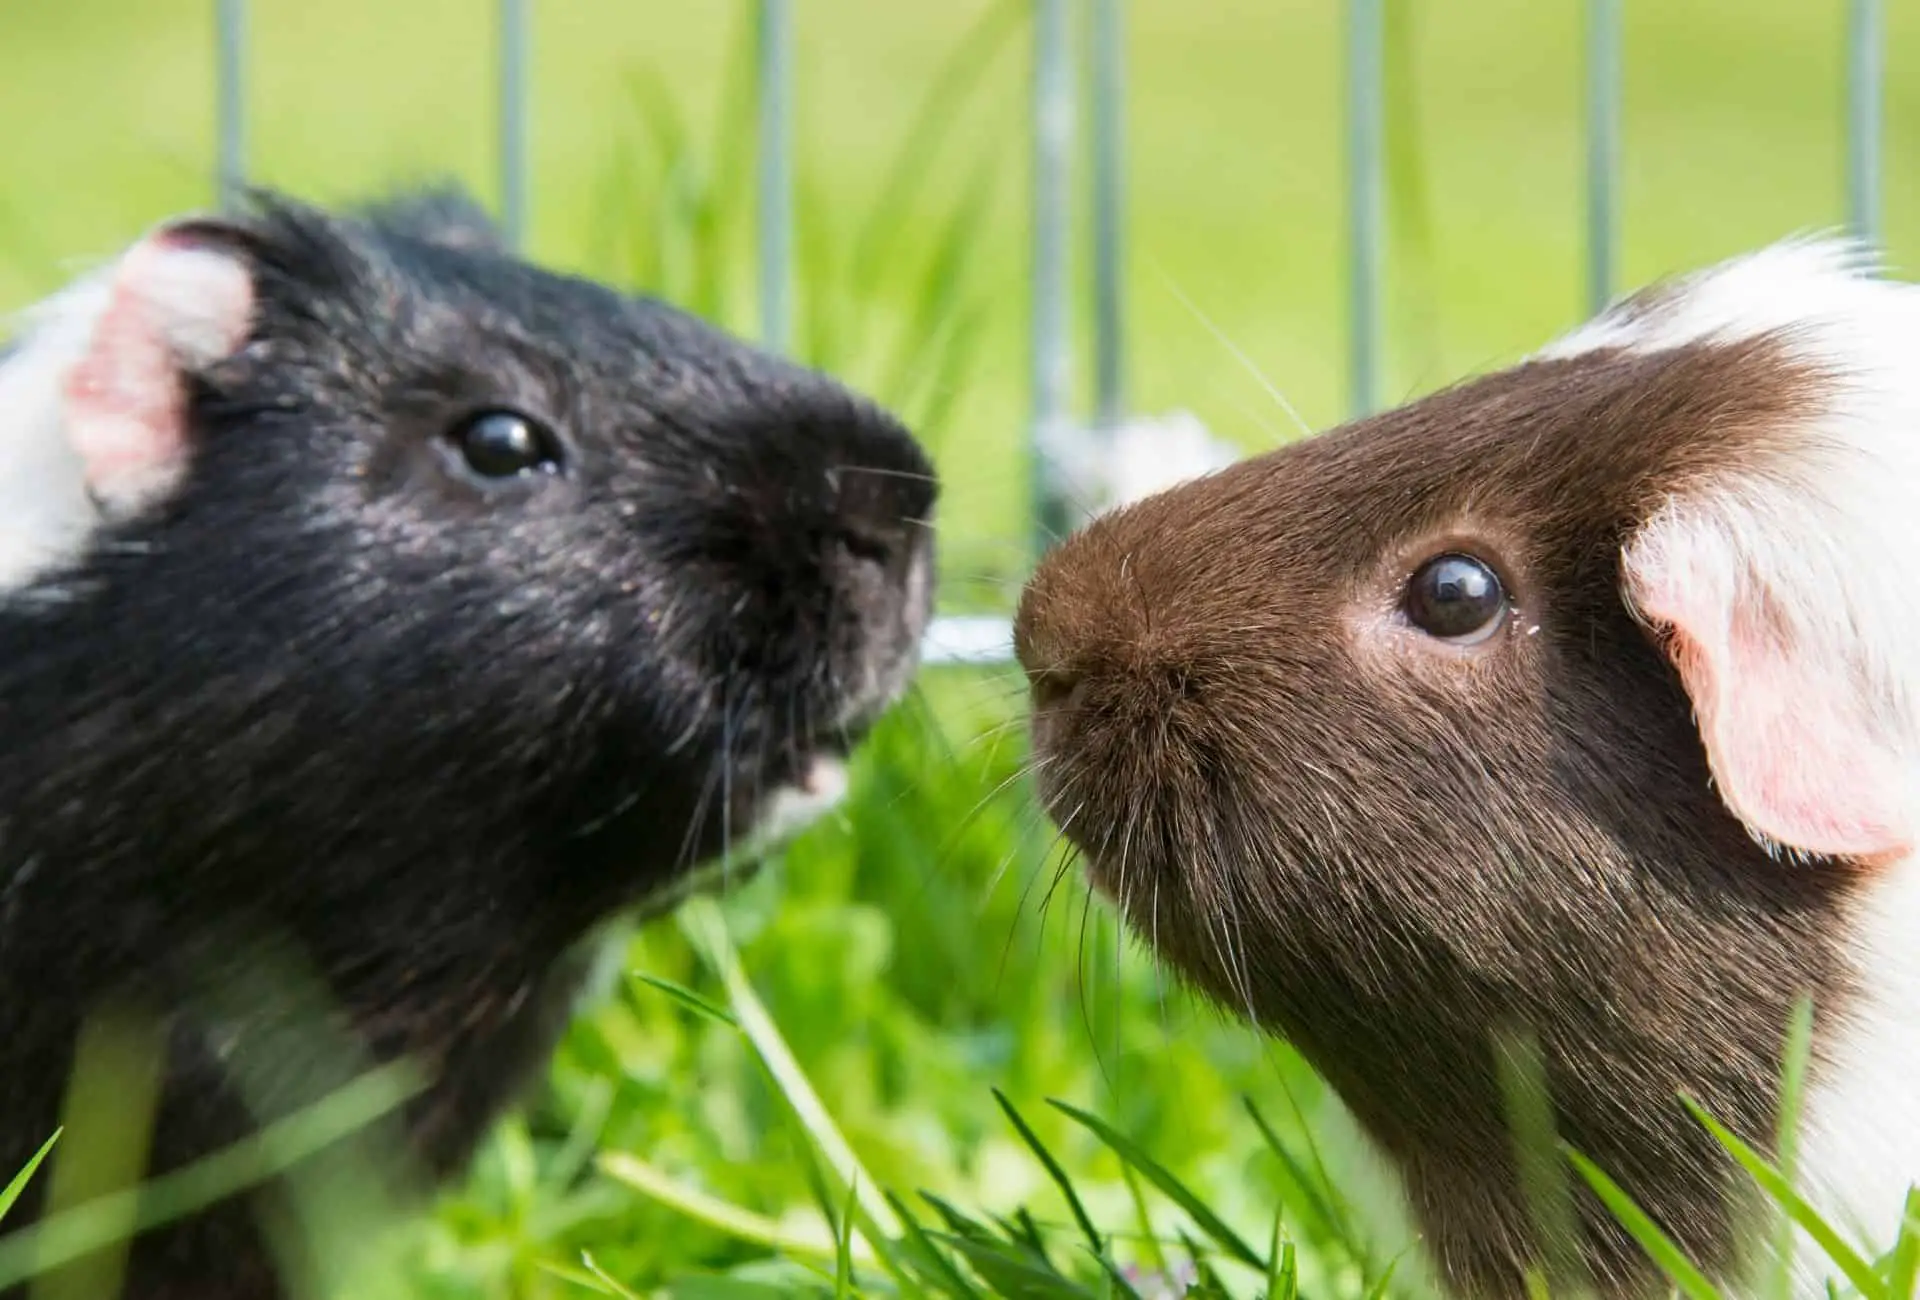 Two guinea pigs nearly touching each other's nose outside in an exercise pen.